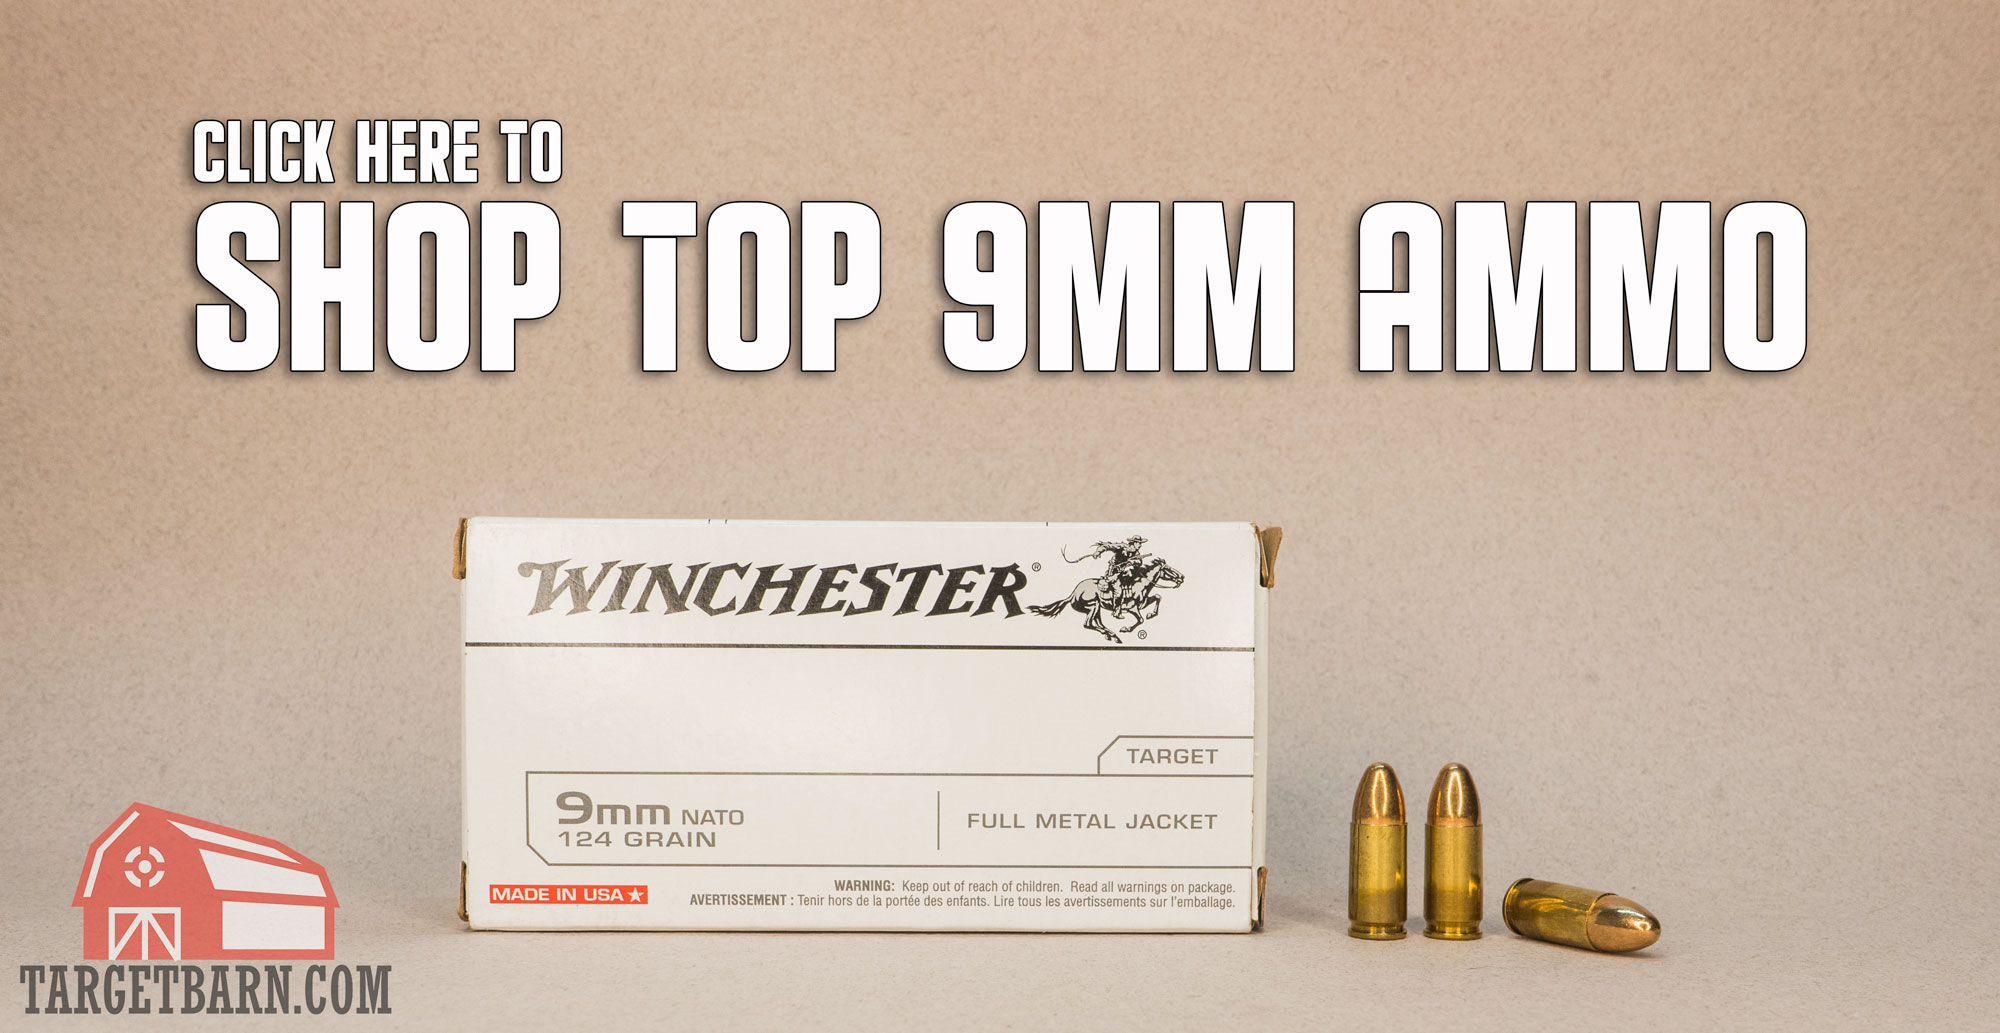 a box of the most common ammo 9mm and three rounds with the text click here to shop top 9mm ammo